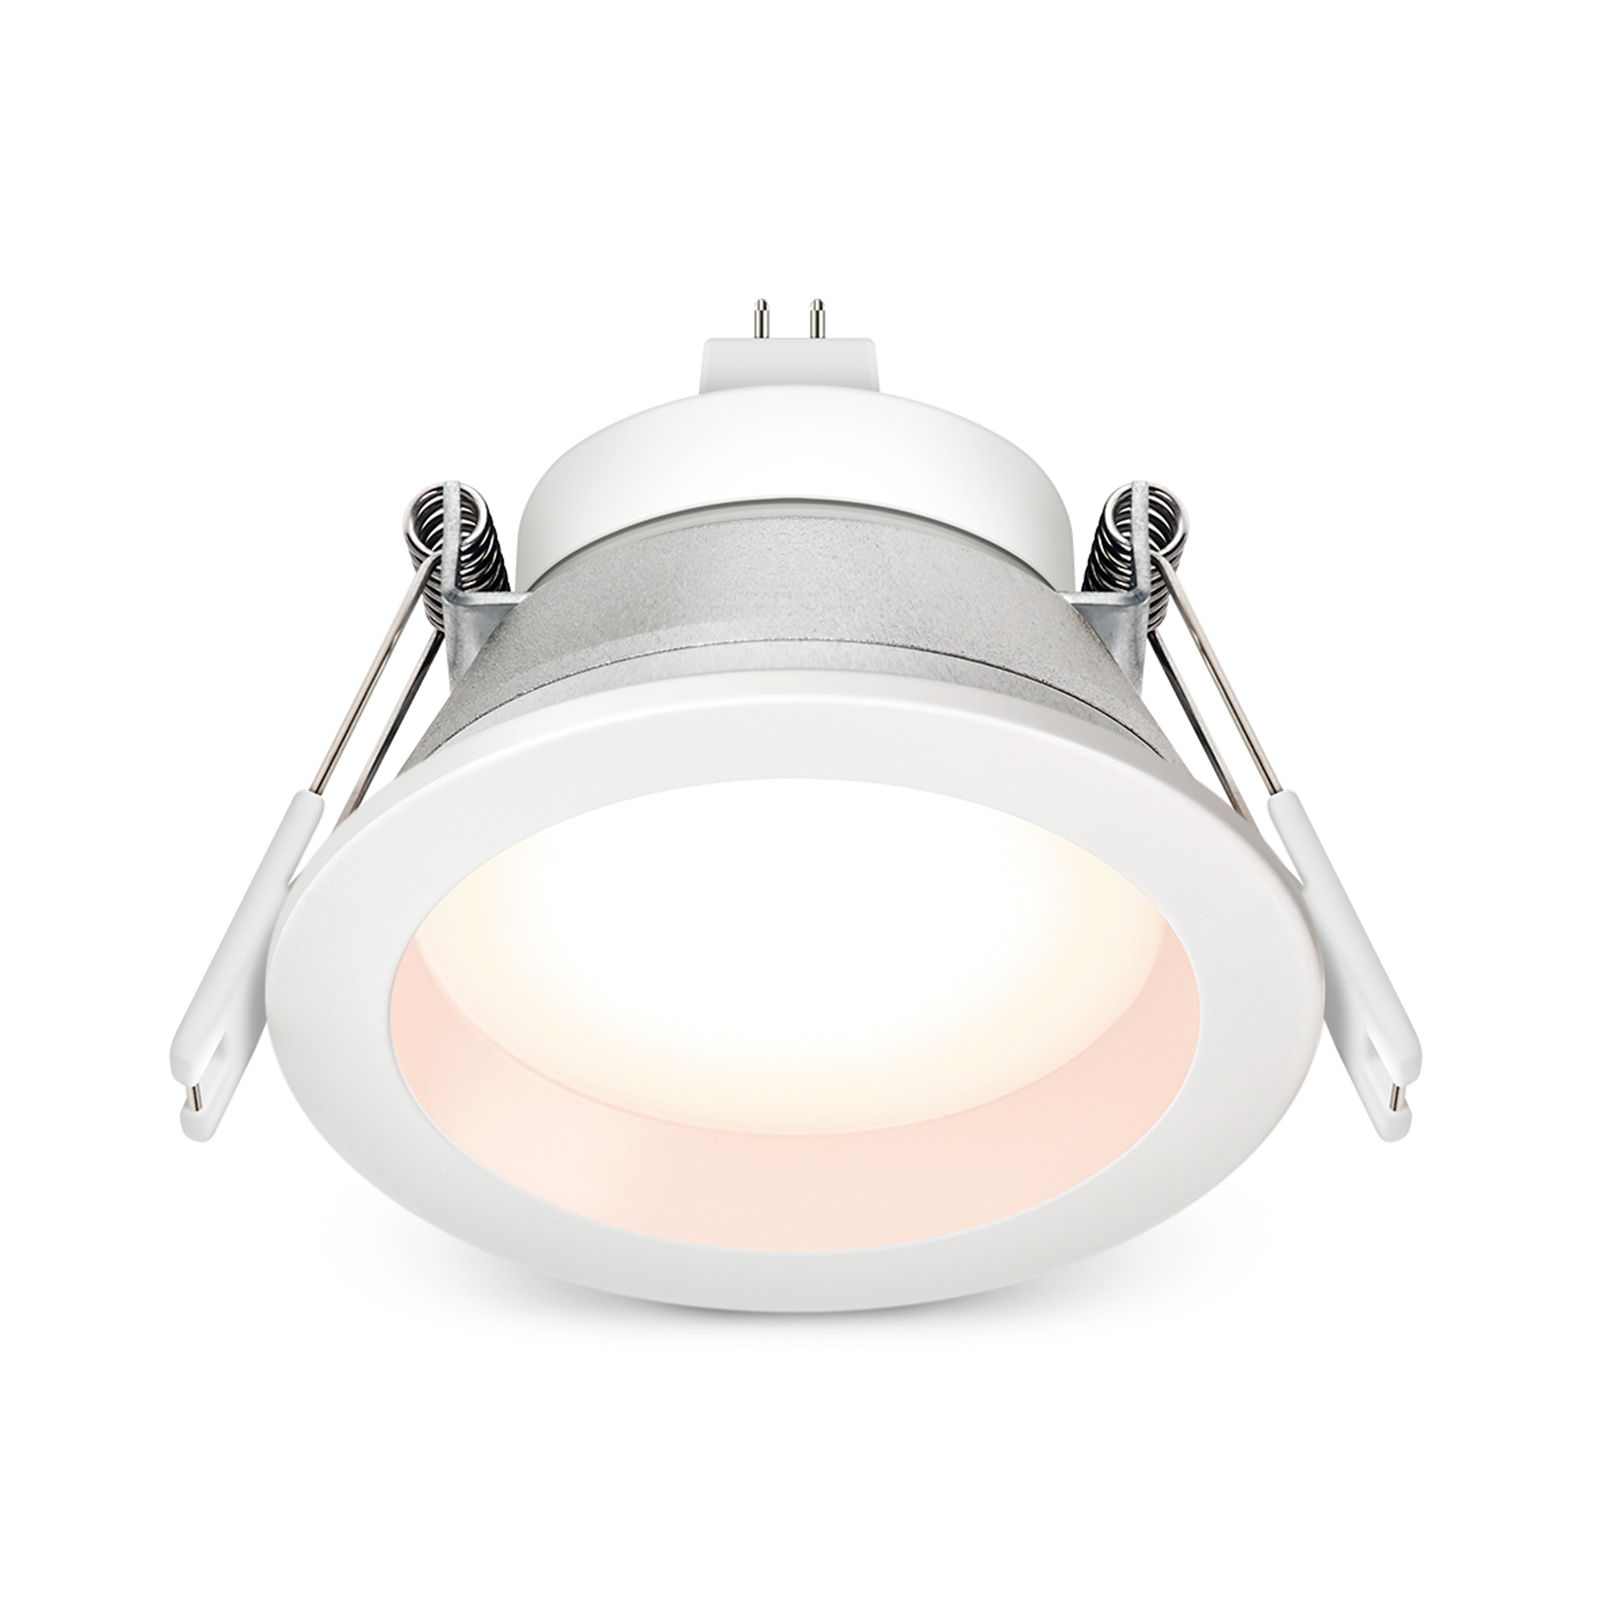 HPM 12V 7W 590lm Cool White Fixed LED Downlight